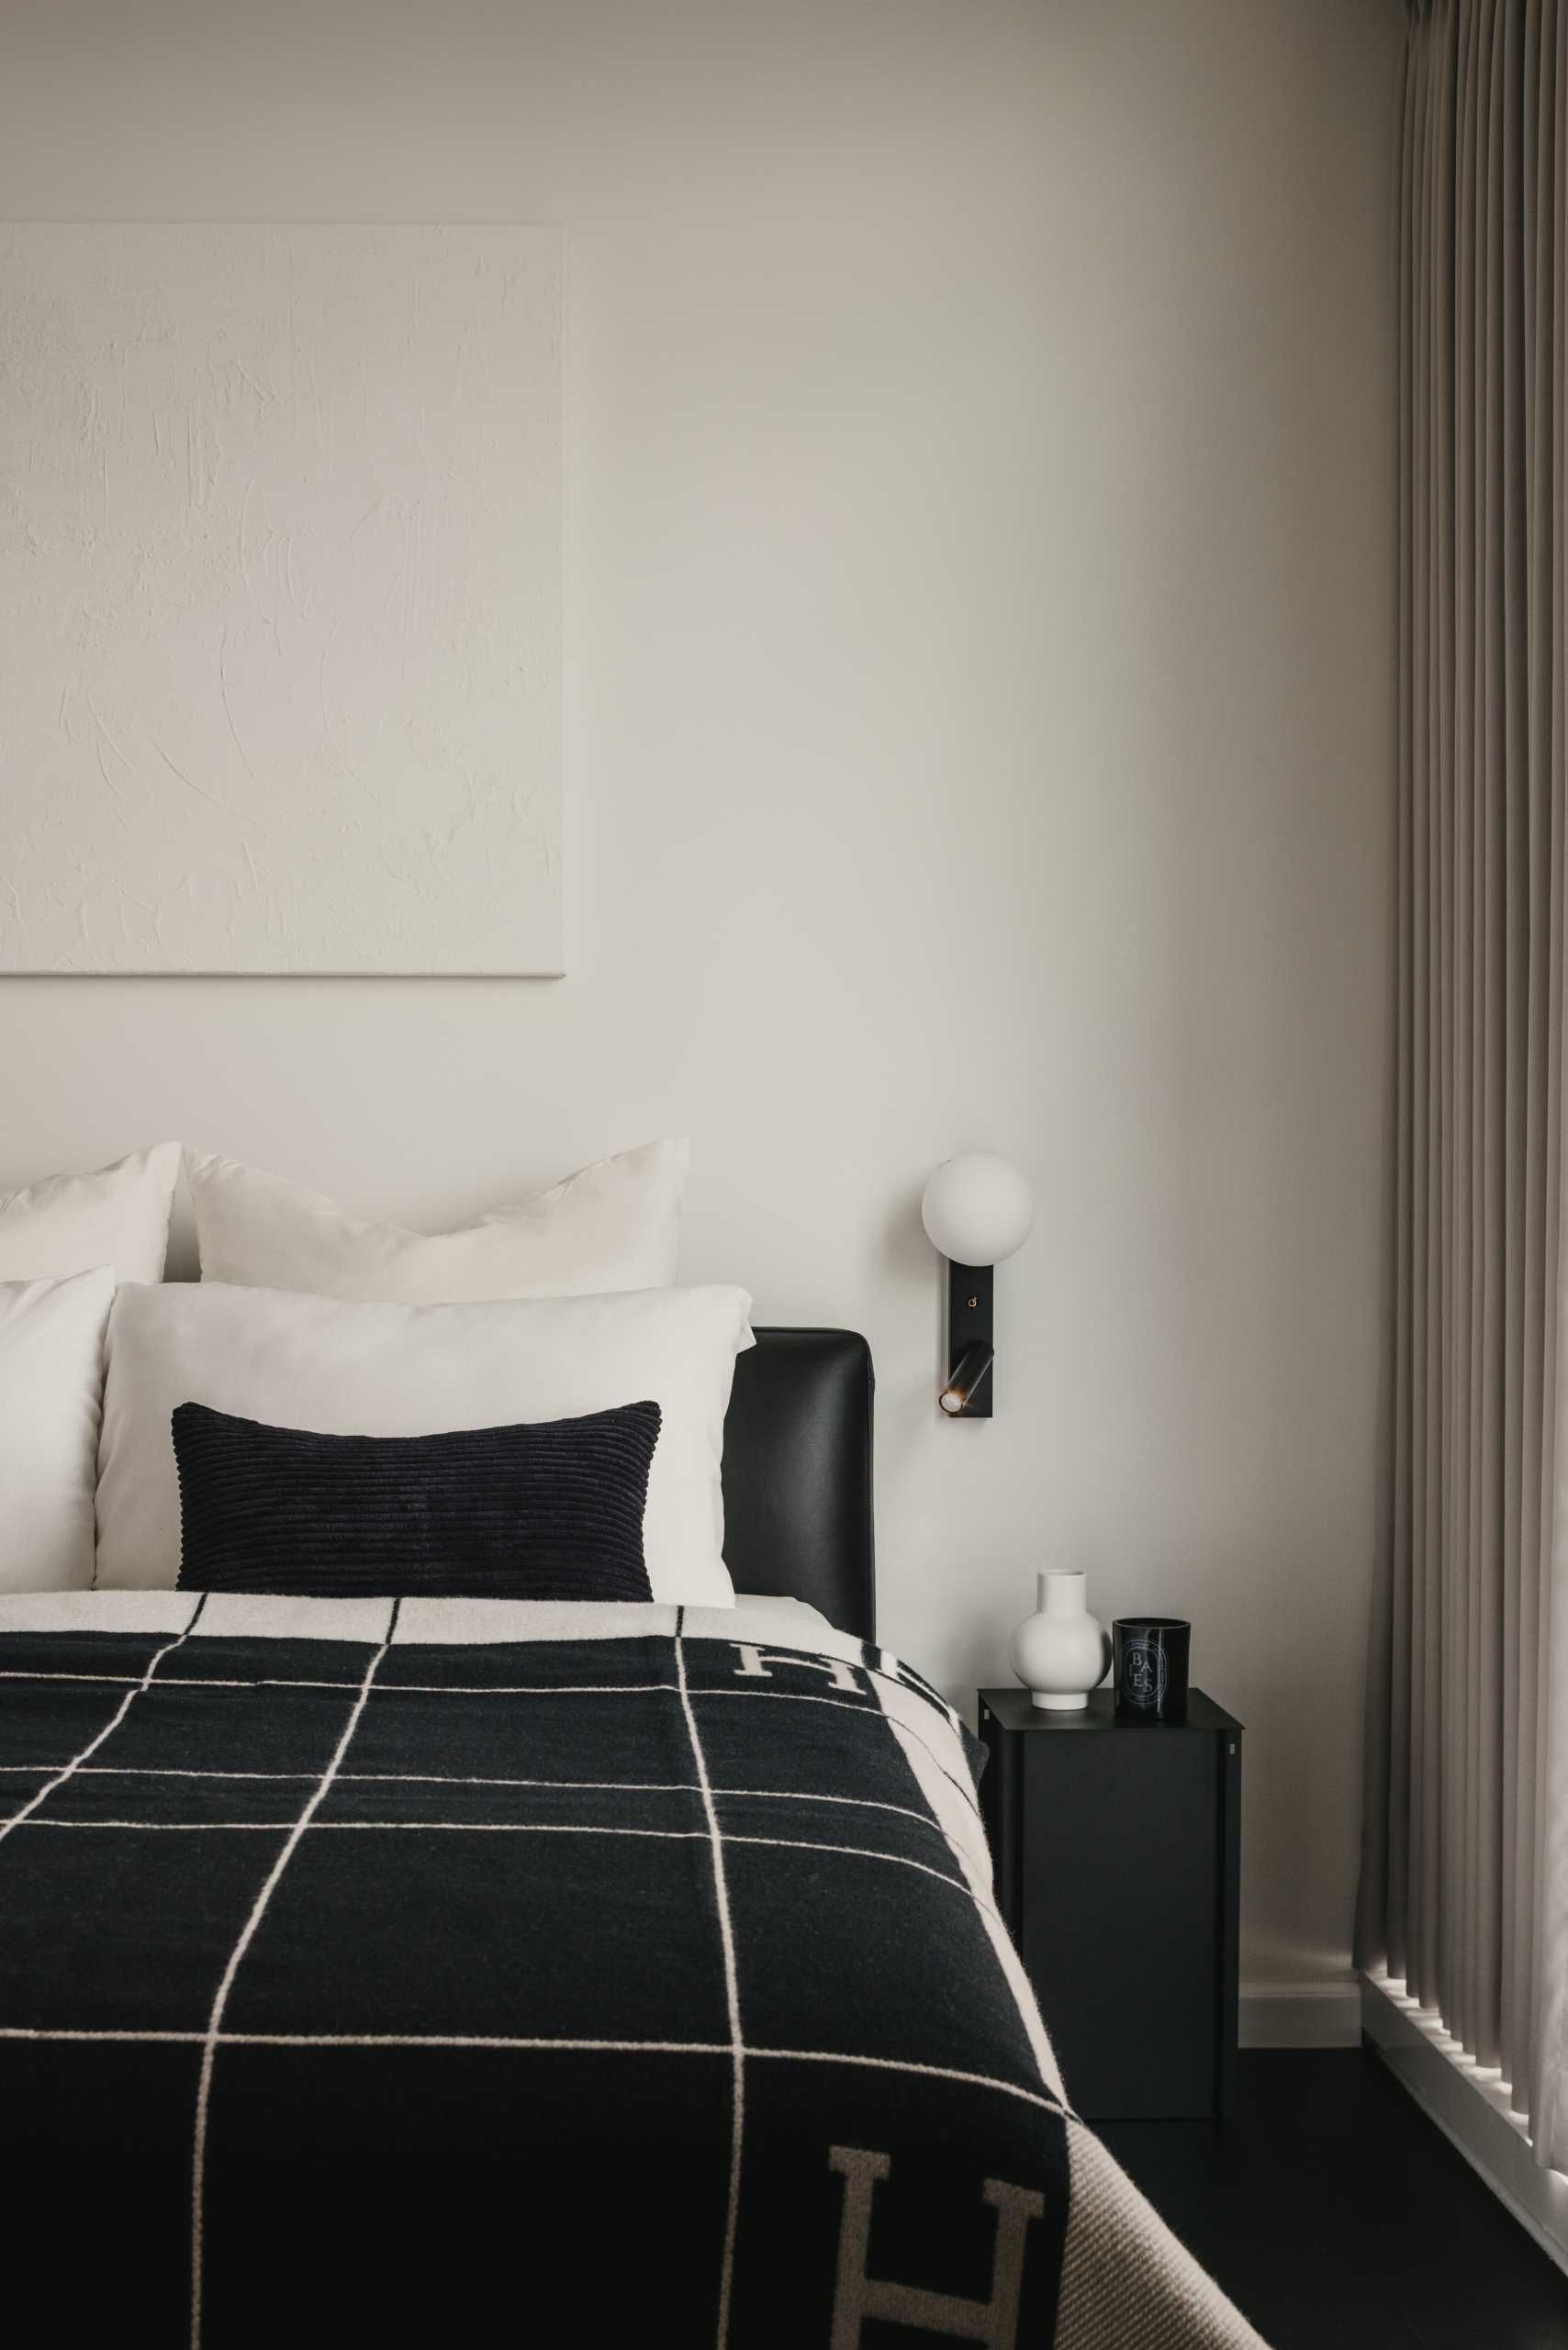 A monochromatic bedroom with black flooring allows the bed frame and bedside table to blend in, while the white artwork almost disappears into its surroundings.